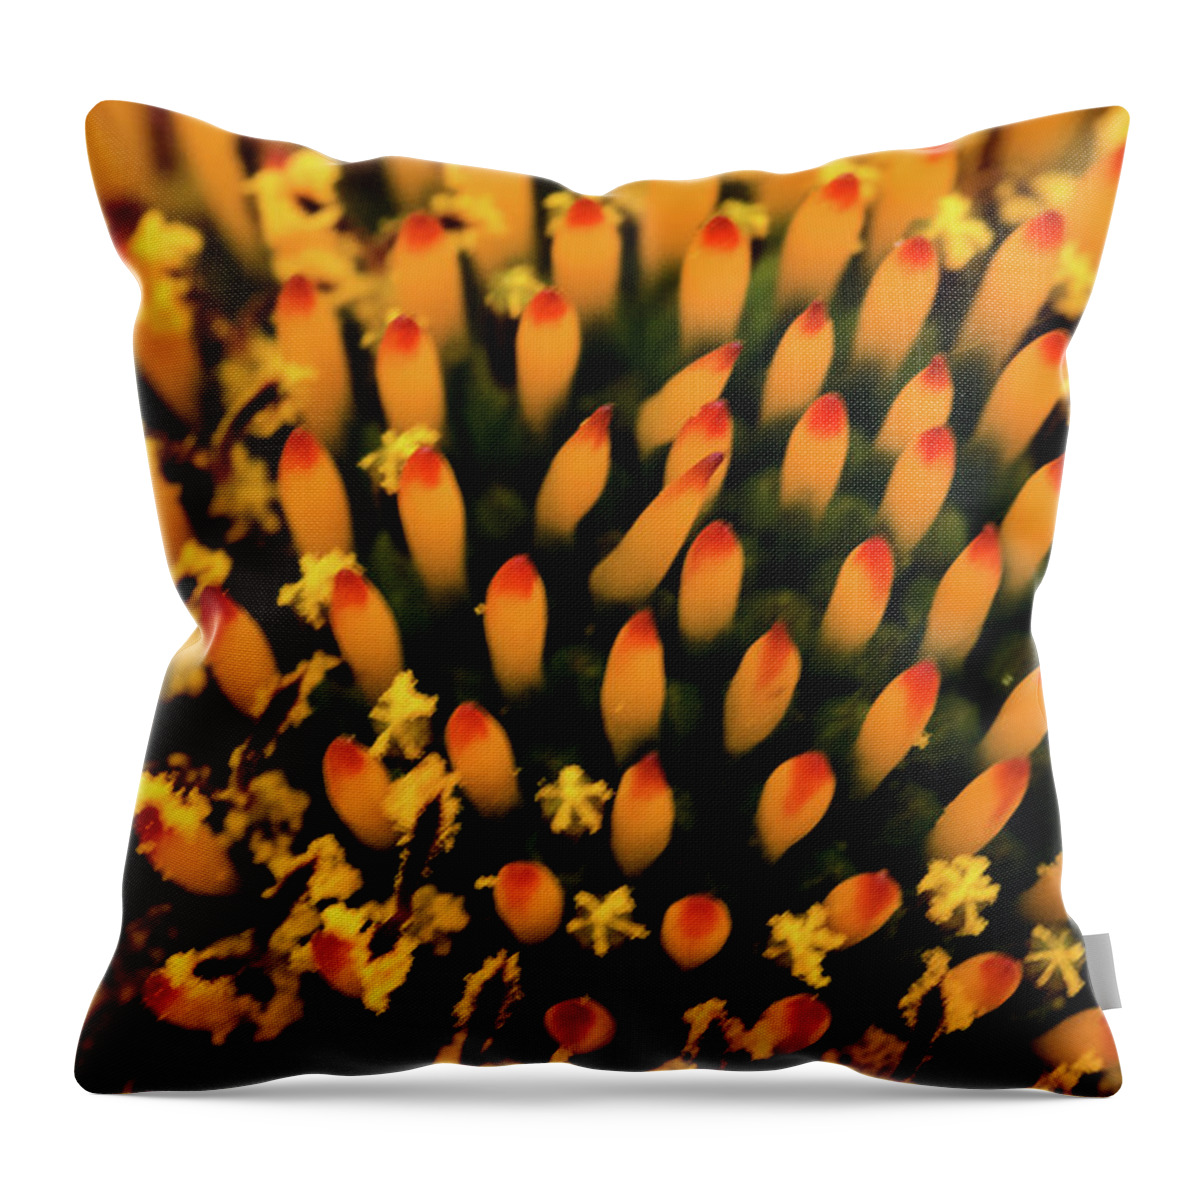 Jay Stockhaus Throw Pillow featuring the photograph Coneflower by Jay Stockhaus